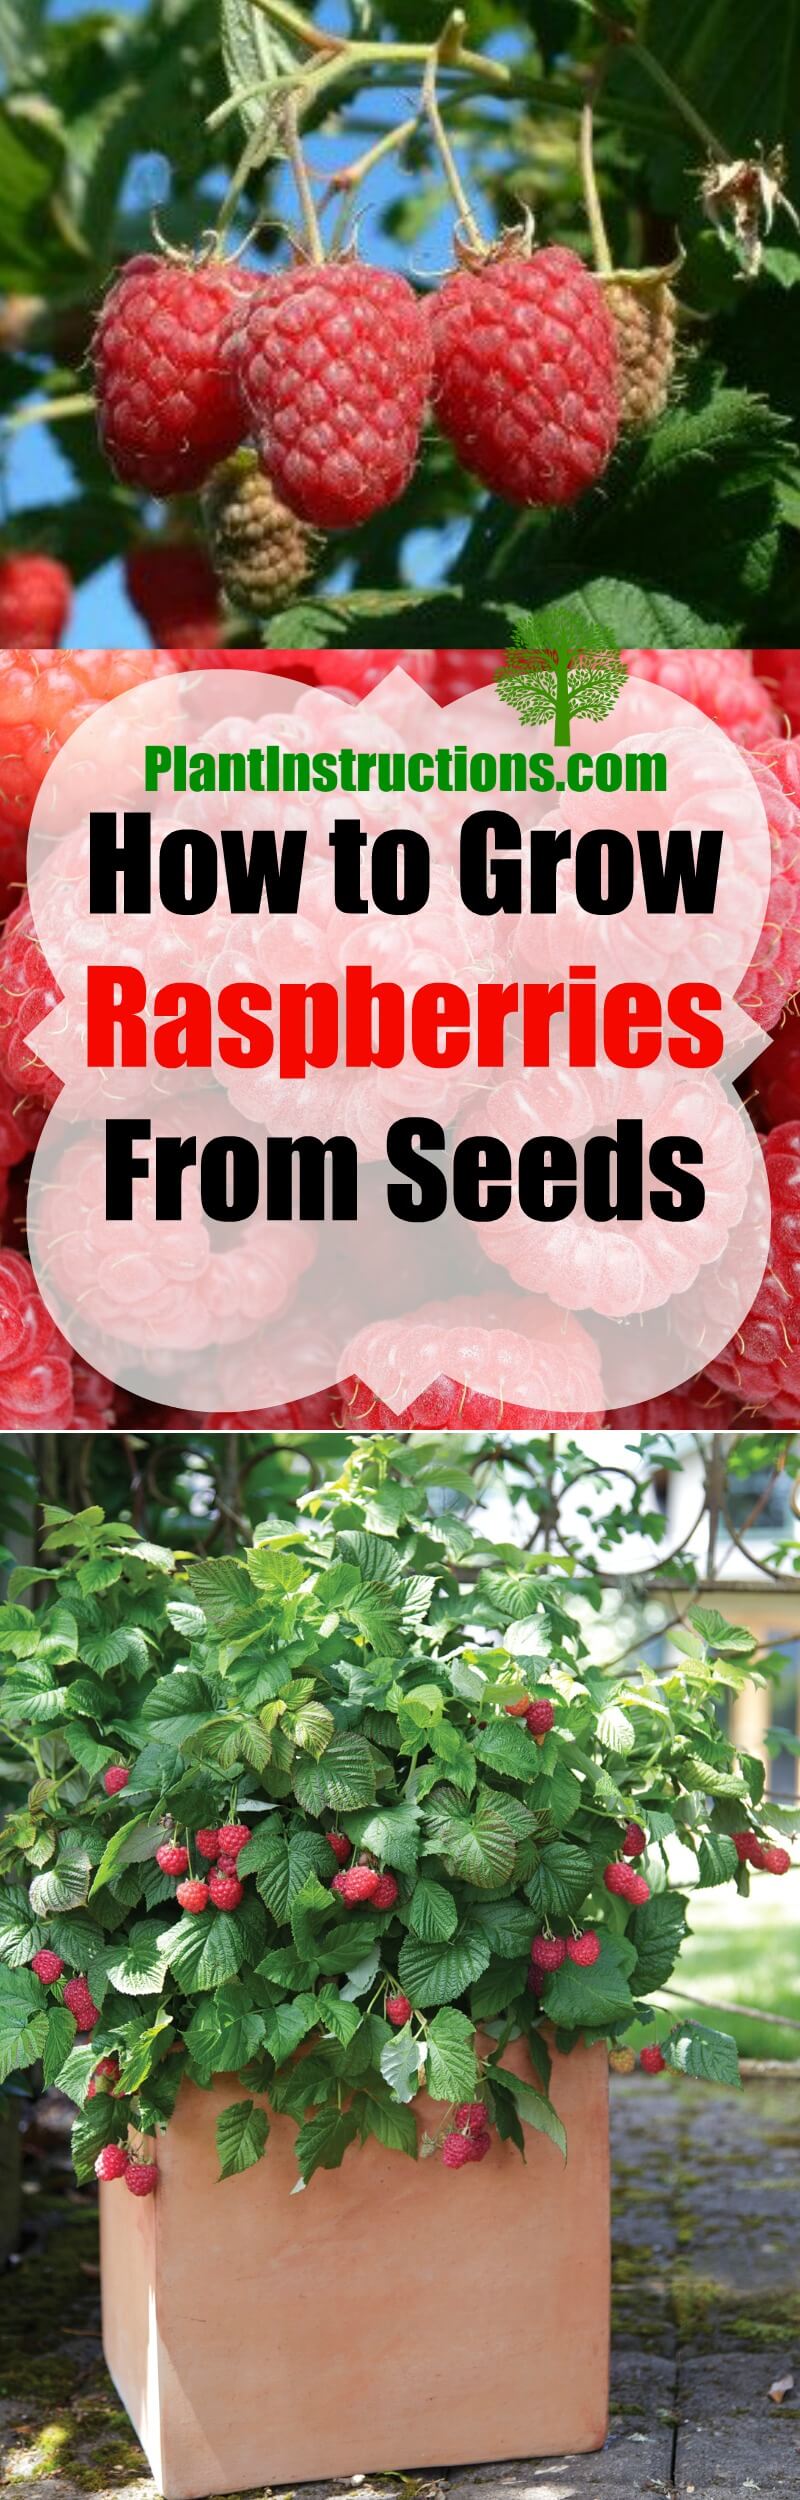 How To Grow Raspberries From Seeds Plant Instructions